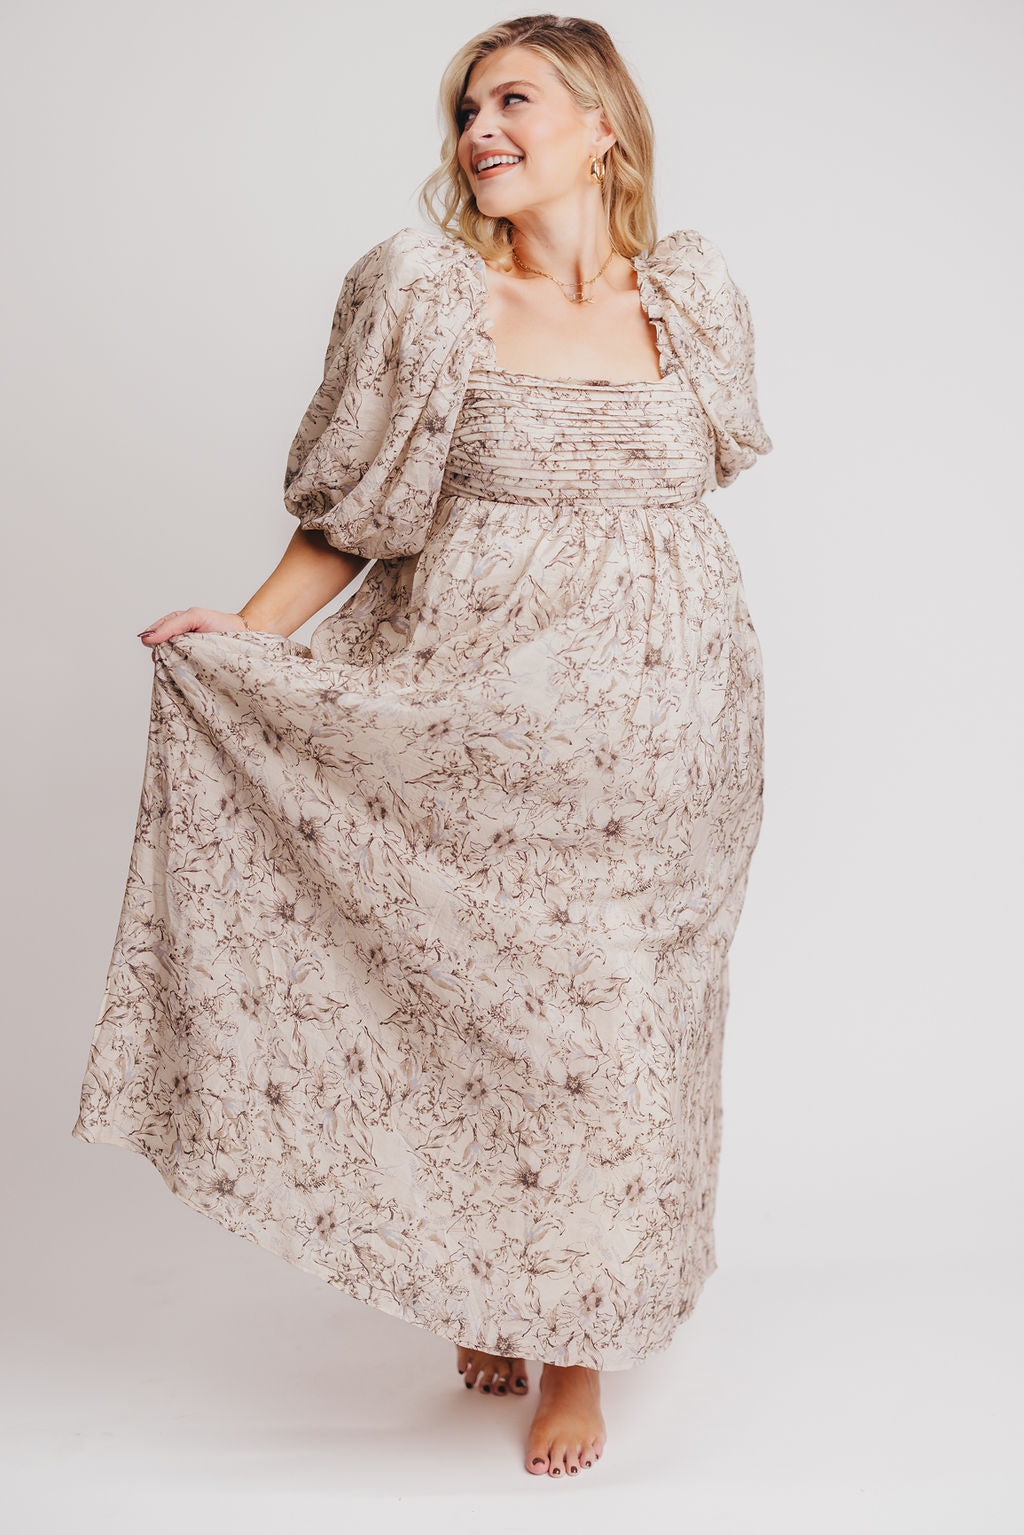 Melody Maxi Dress with Pleats and Bow Detail in Brown and Blue Floral - Bump Friendly & Inclusive Sizing (S-3XL) (Sale Dress of the Week $40 off!)